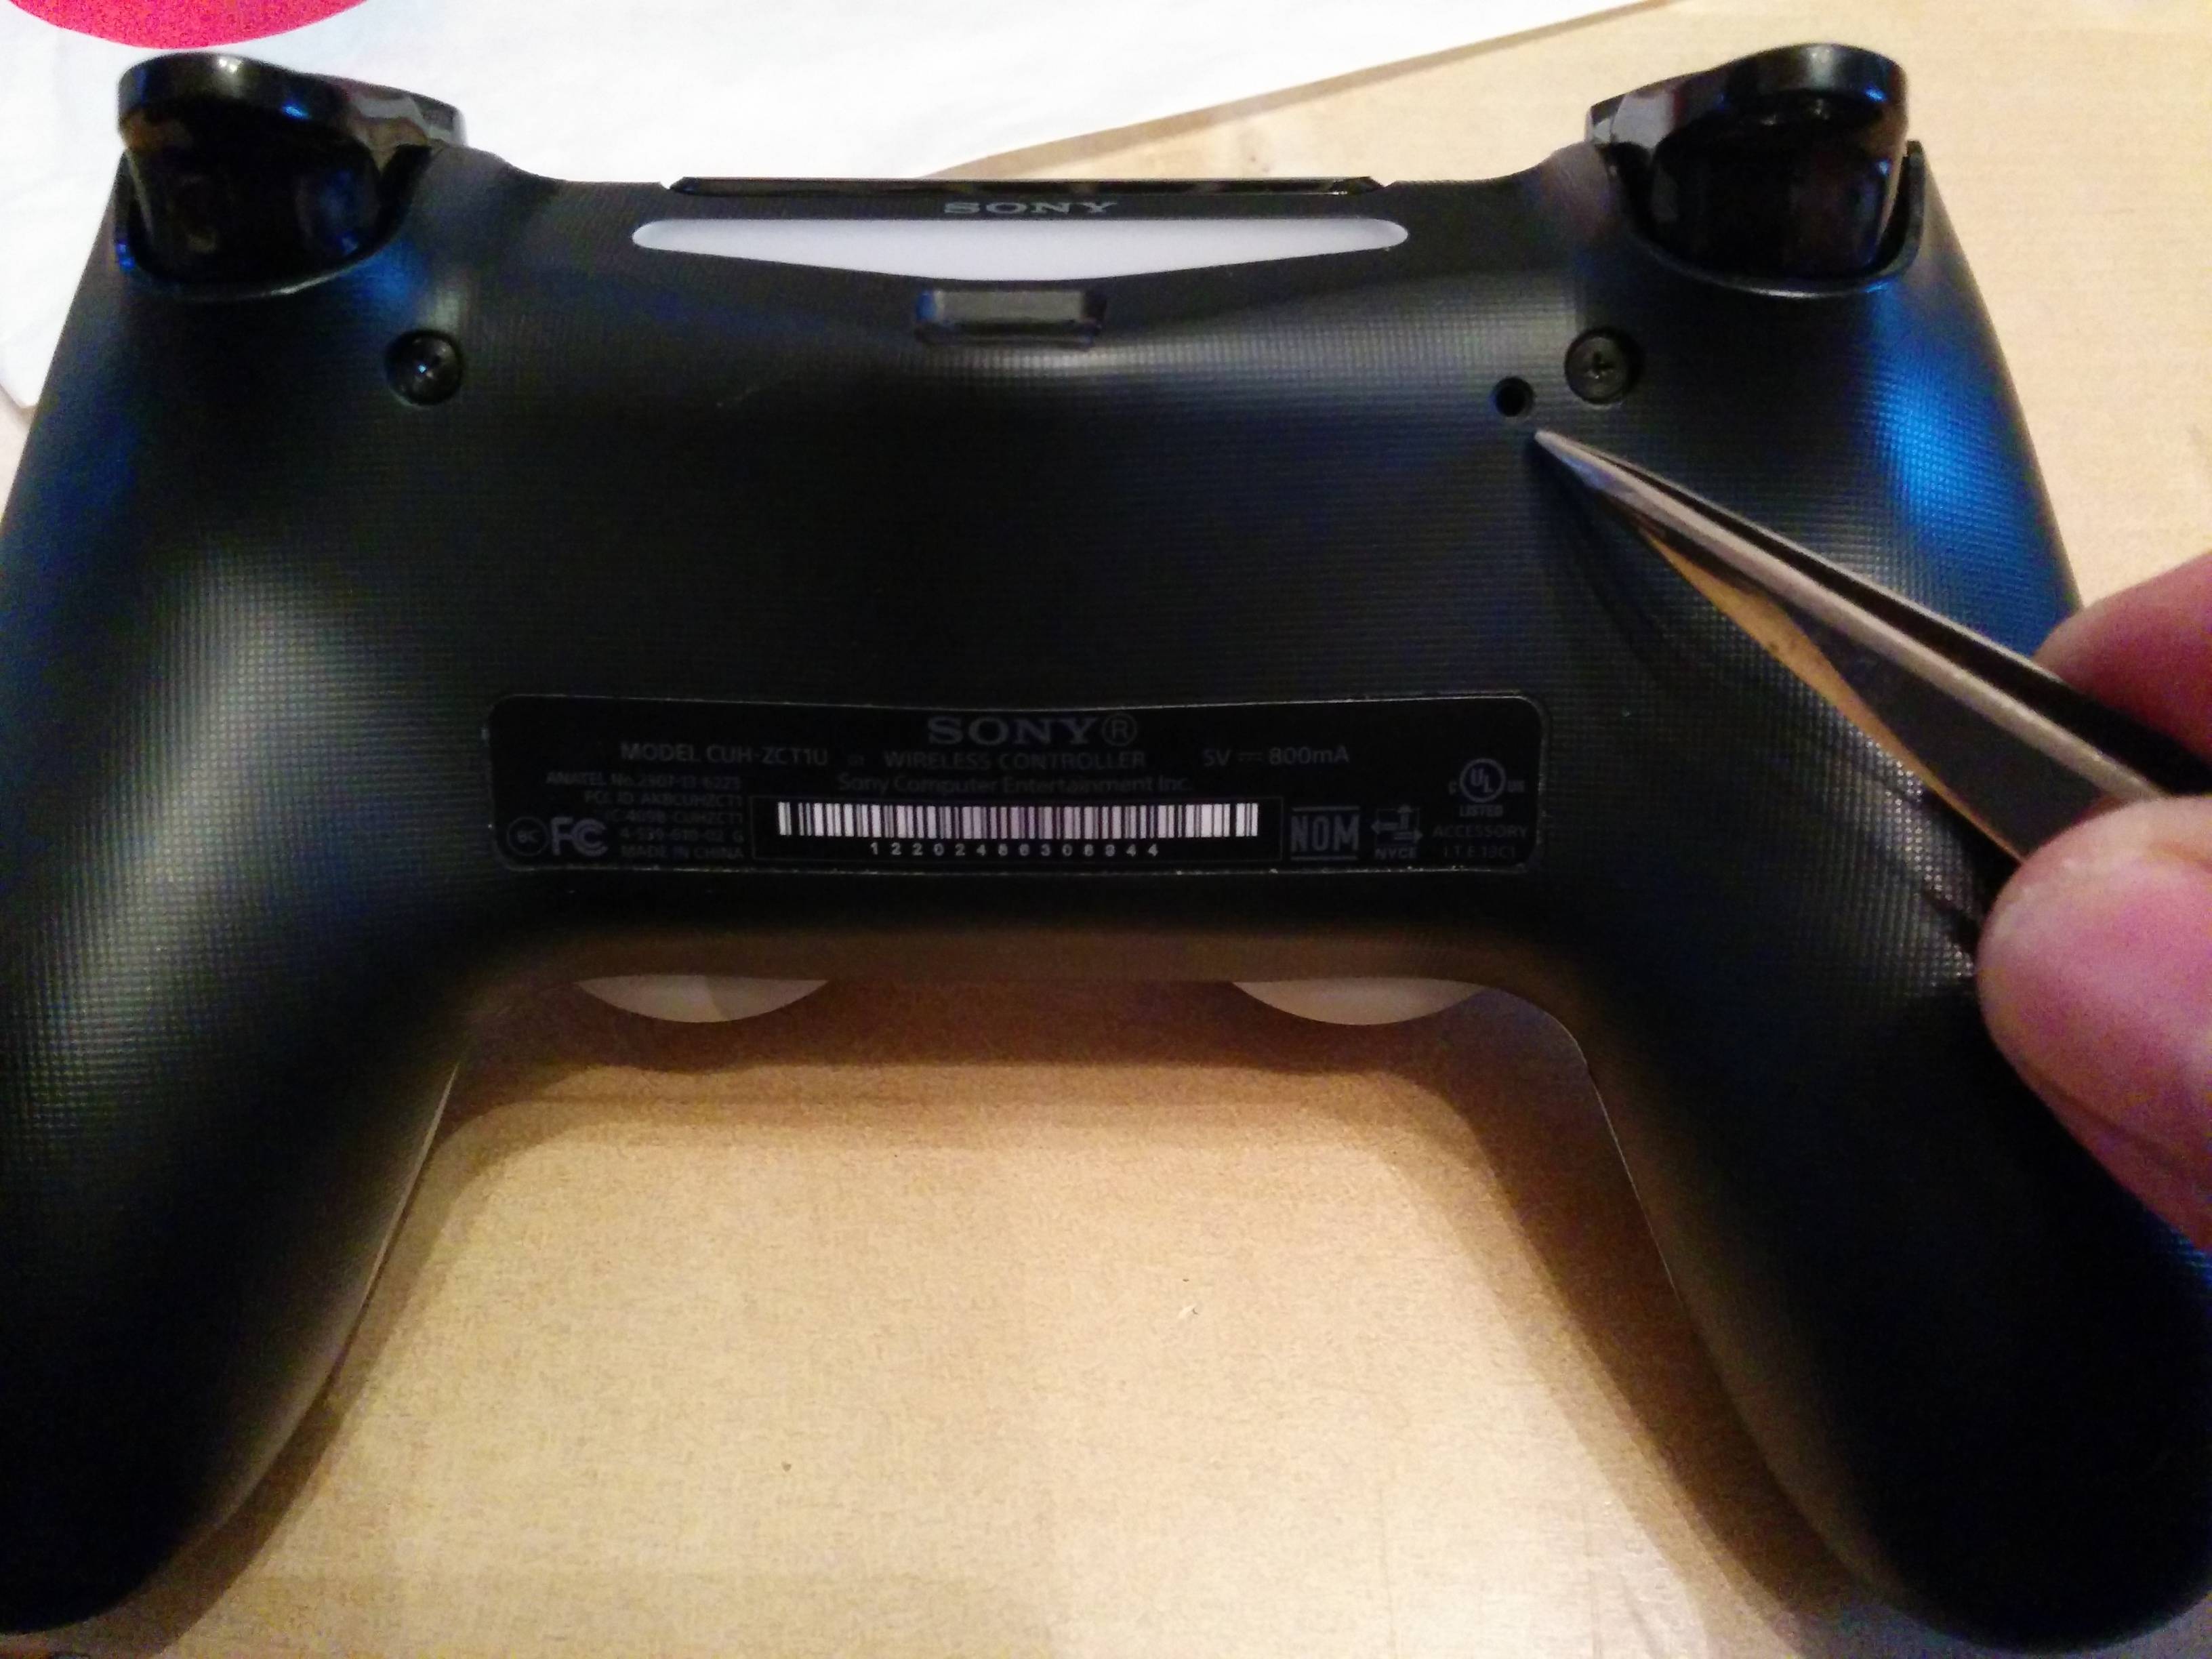 Locate the small hole on the back of the PS4 controller.
Use a paperclip or a similar object to press and hold the reset button inside the hole.